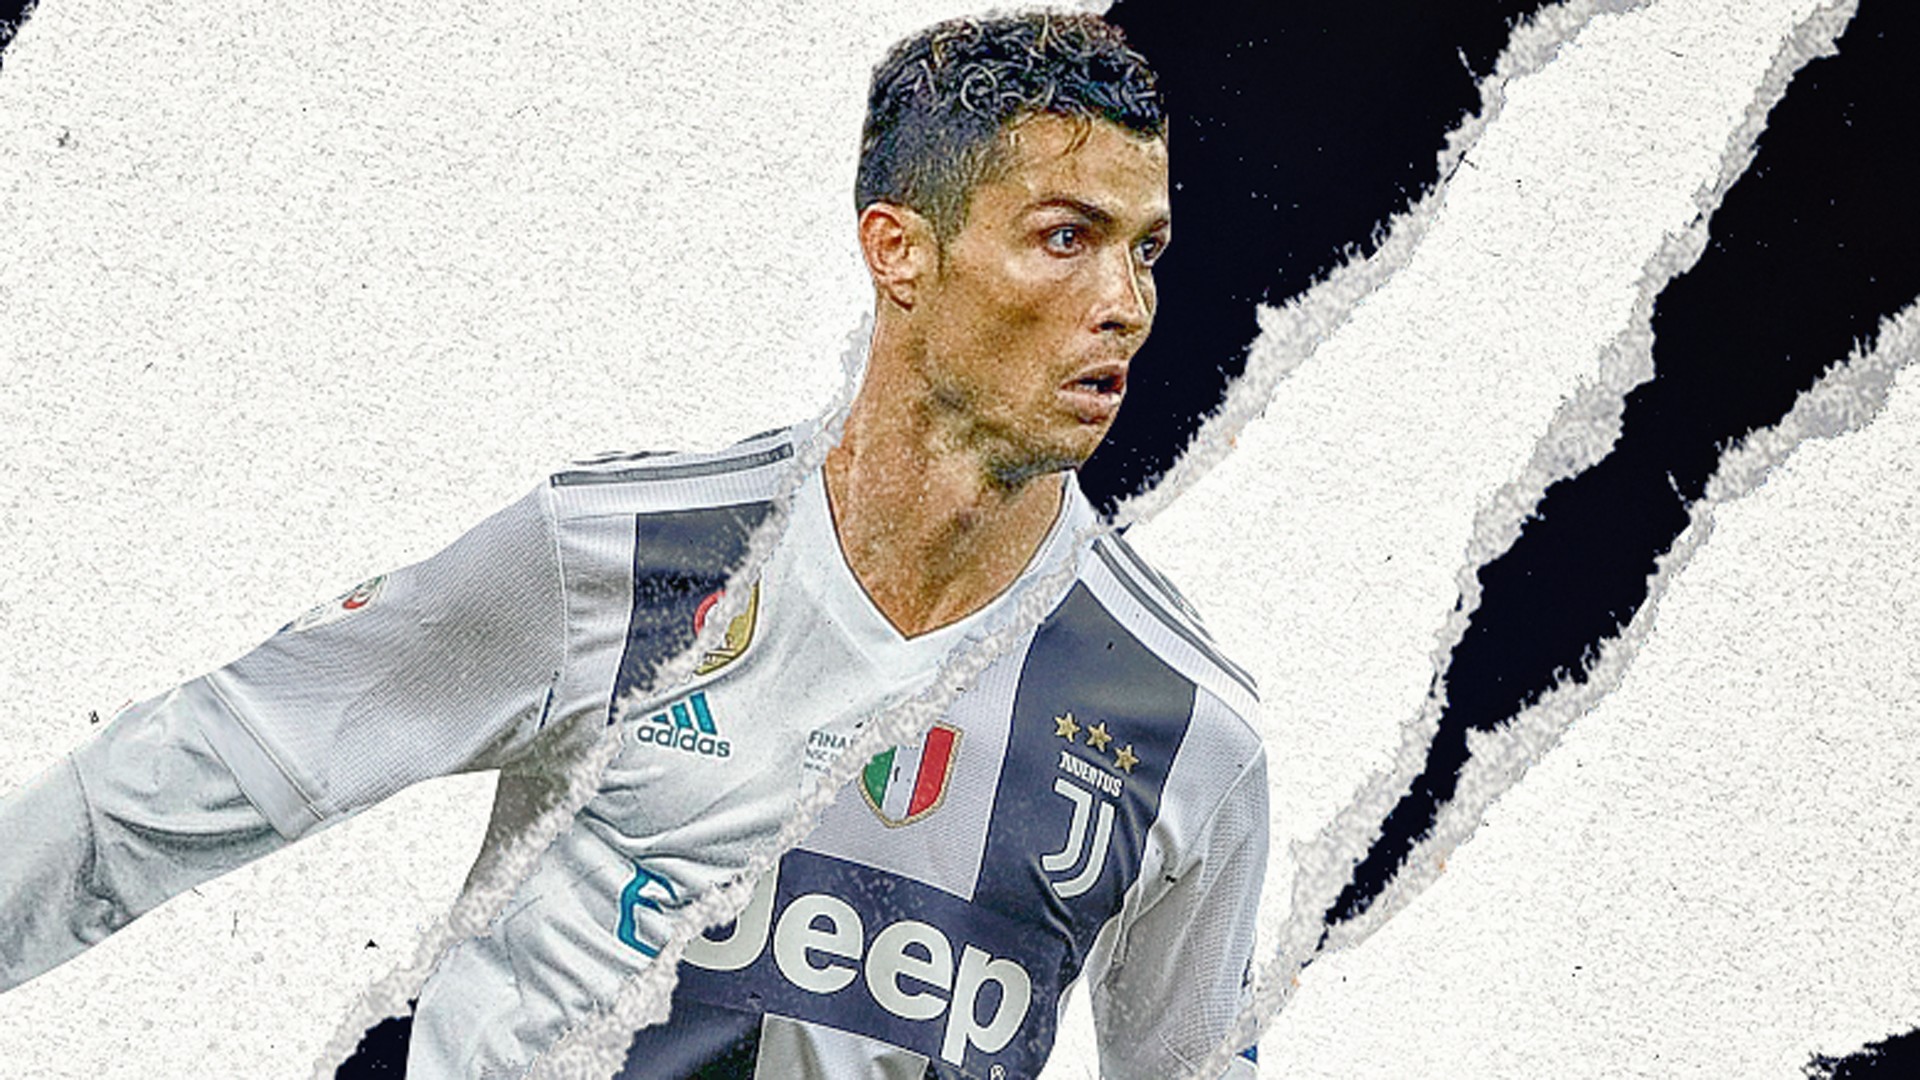 HD Wallpaper C Ronaldo Juventus With Resolution 1920X1080 pixel. You can make this wallpaper for your Desktop Computer Backgrounds, Mac Wallpapers, Android Lock screen or iPhone Screensavers